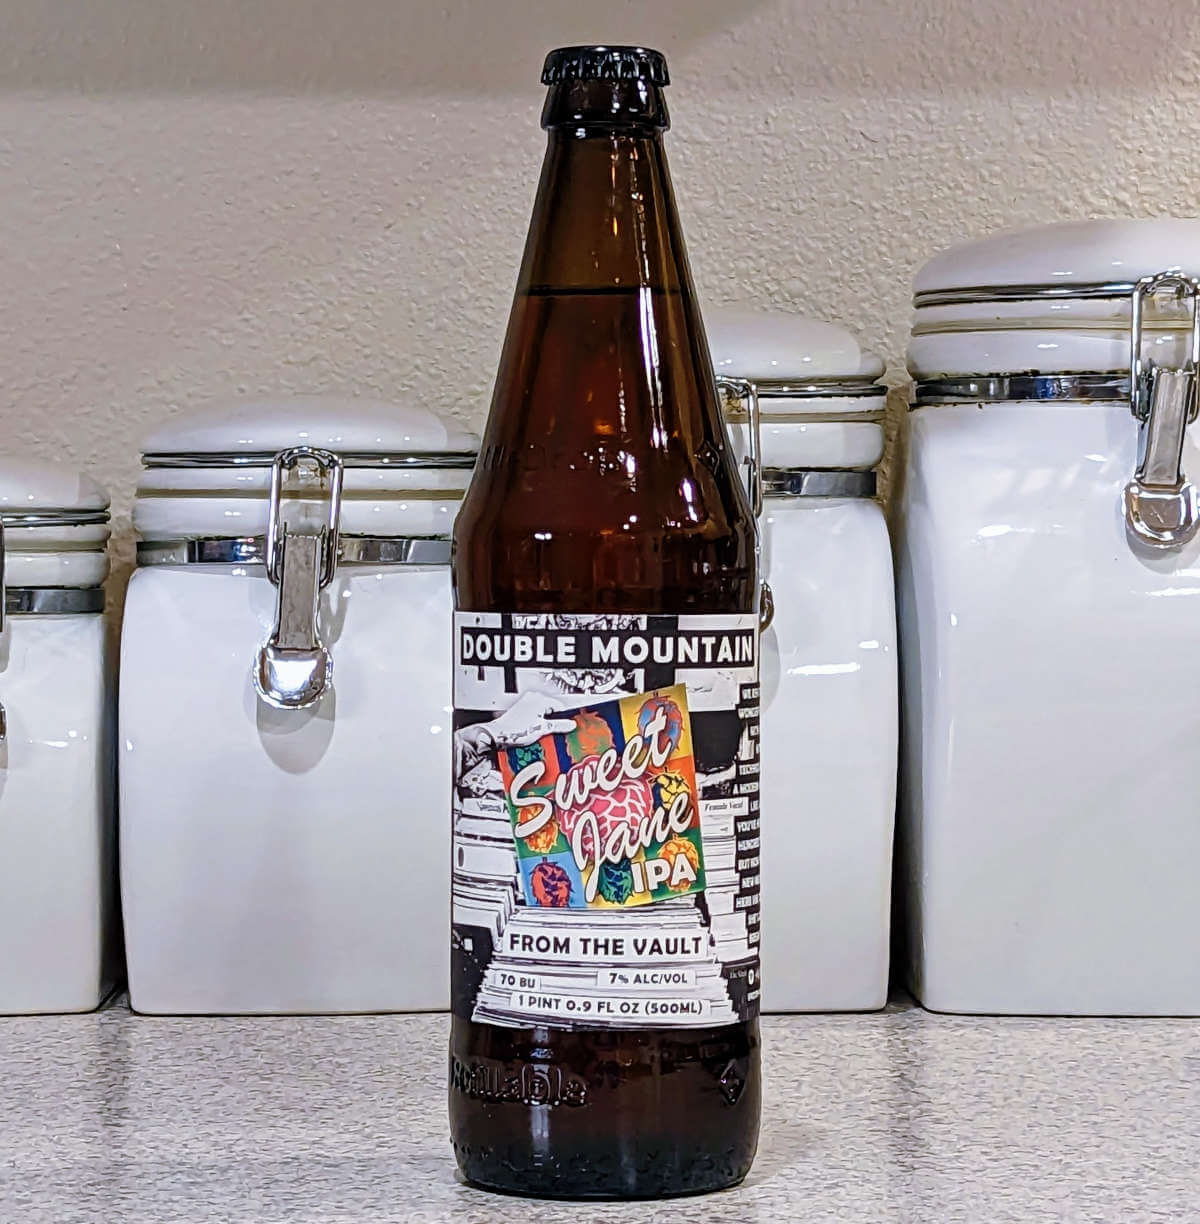 Double Mountain Brewery releases Sweet Jane IPA from the vault